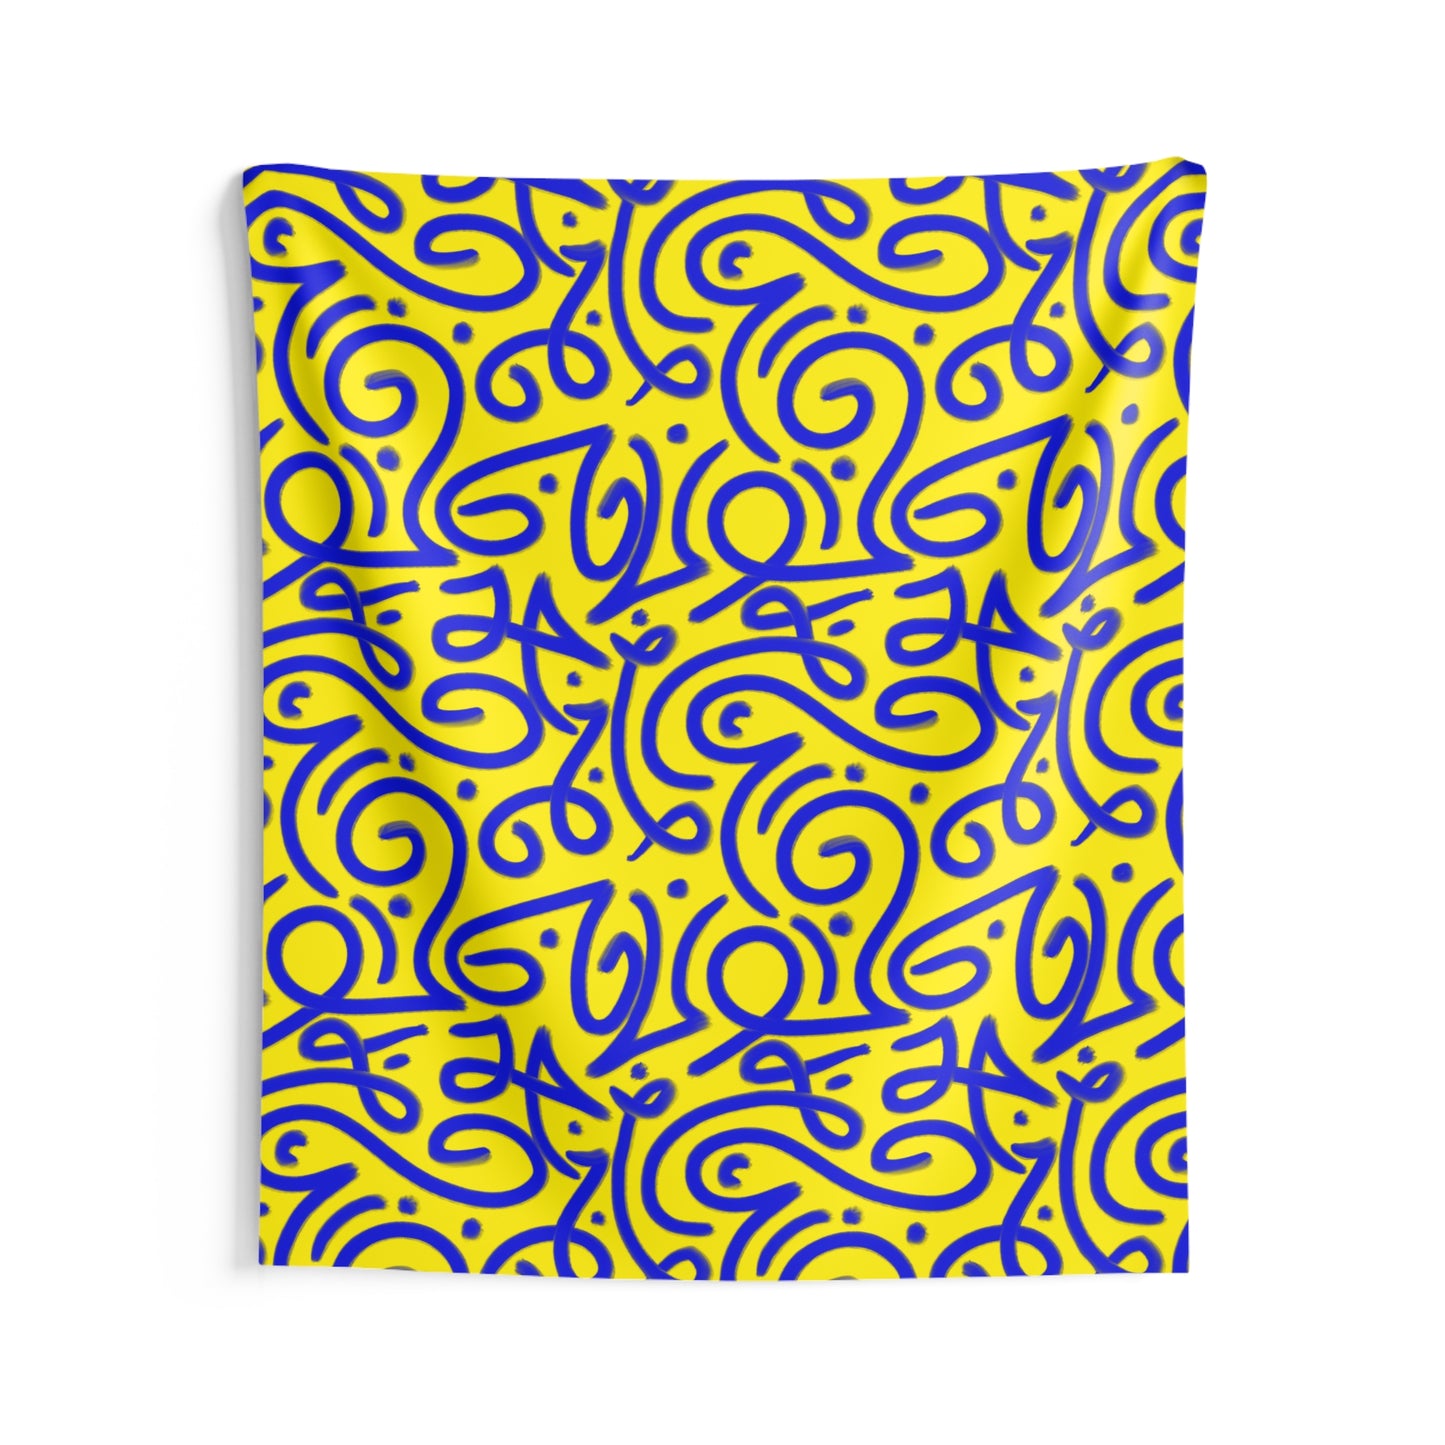 Fun Playful Light Language Script on Indoor Wall Tapestry - Yellow and Blue